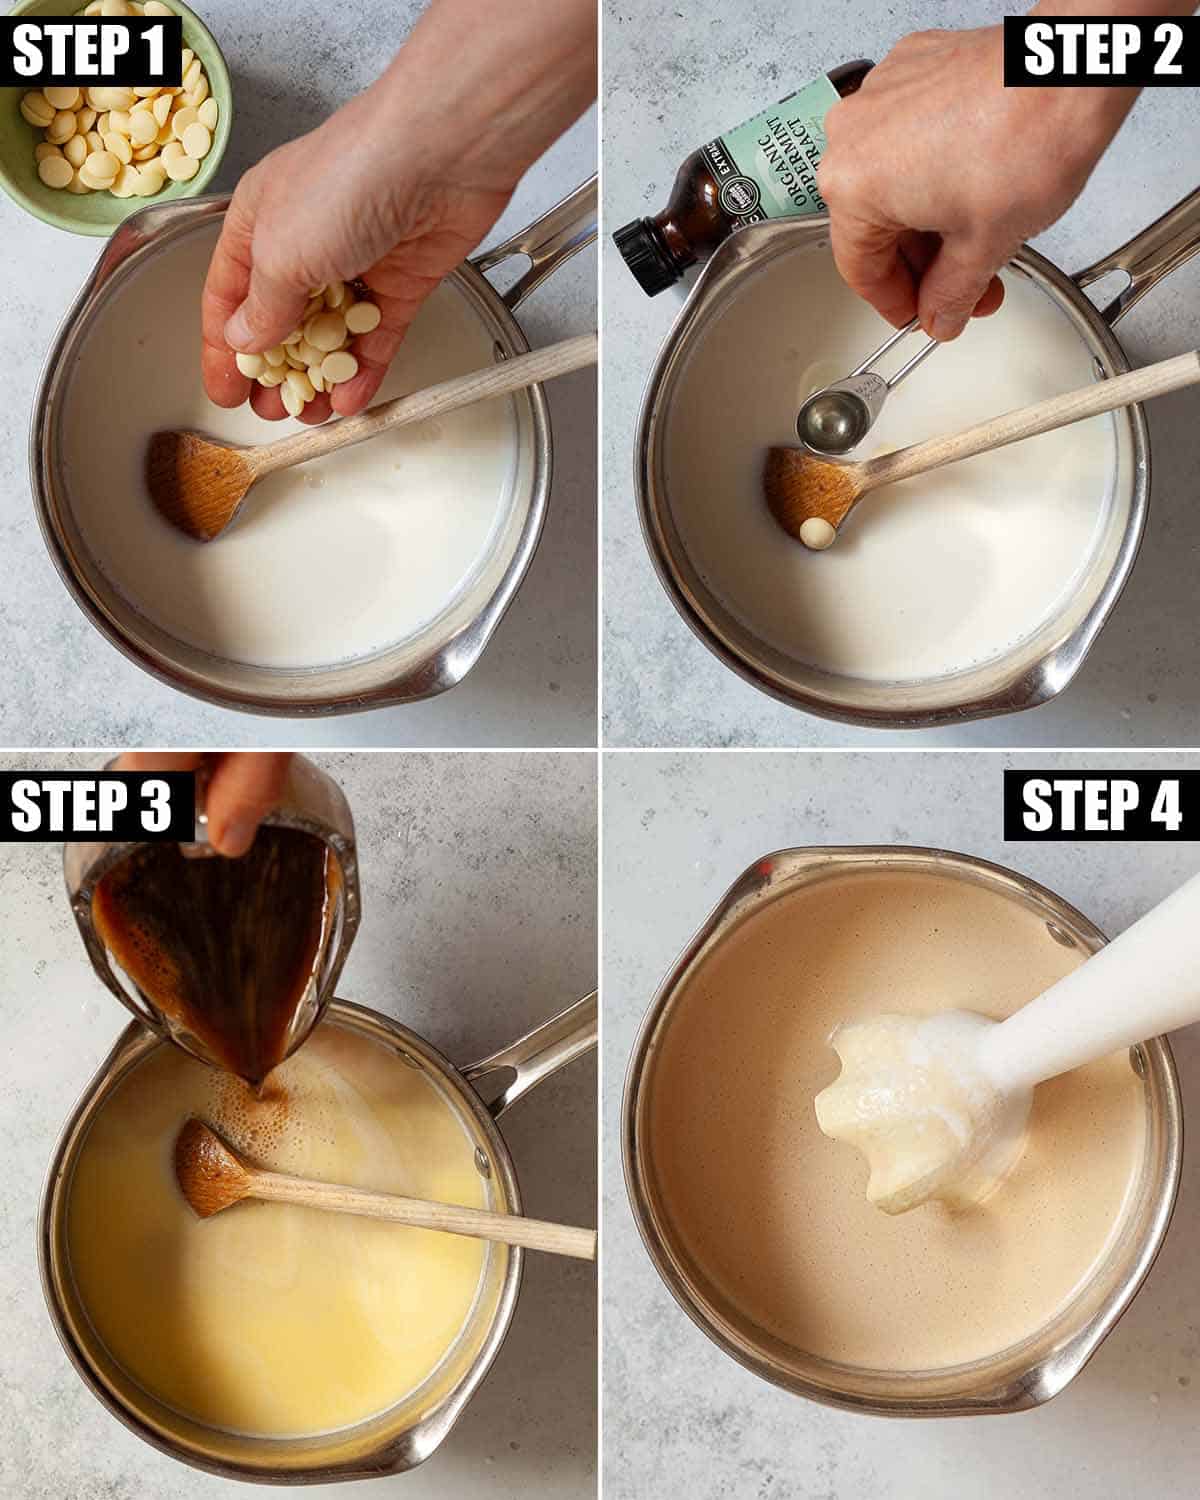 Collage of images showing a milky coffee drink being made.